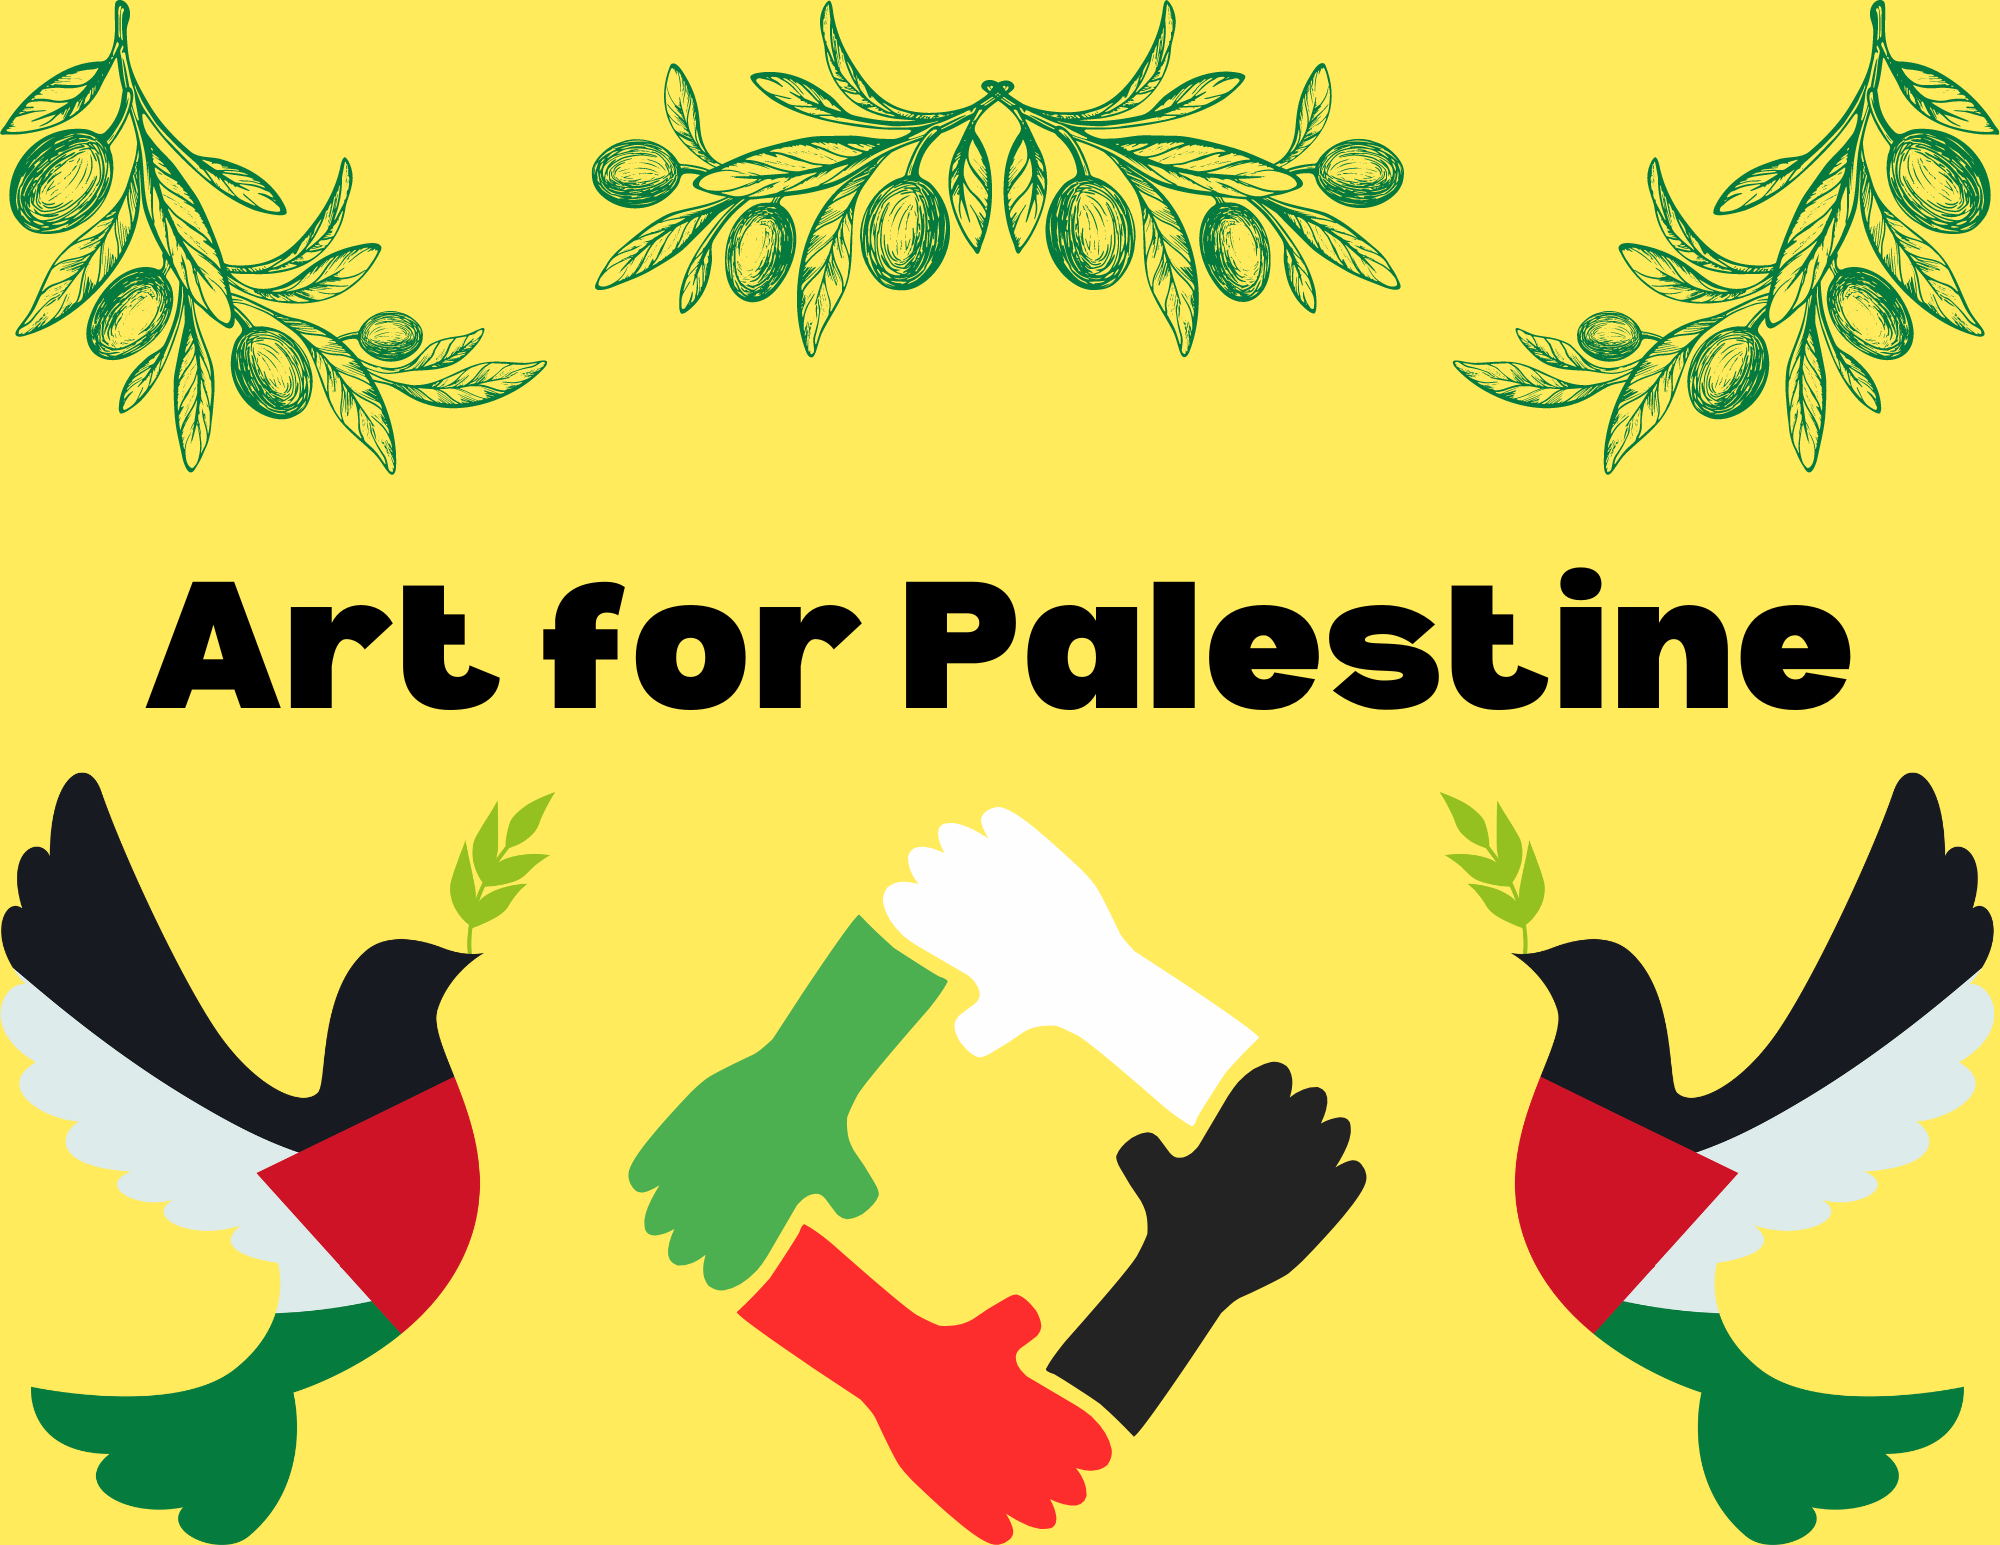 Image of olive branches and the Palestinian flag, with the title "Art for Palestine"